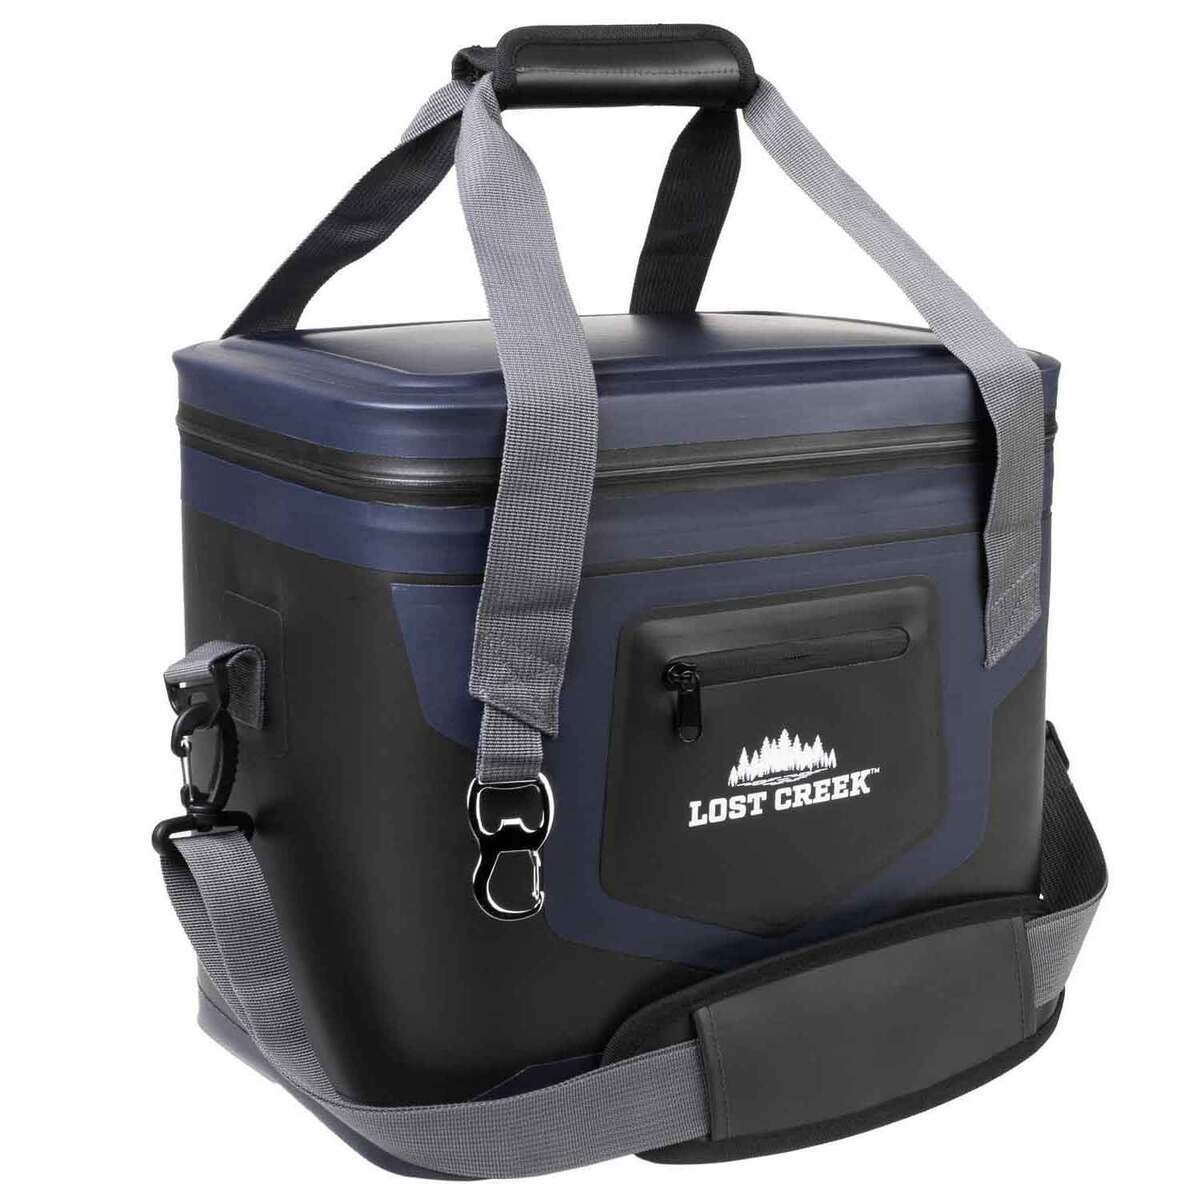 Seattle Sports Roll Catch Cooler Kayak Boat Fishing Insulated Catch Bag,  Gray